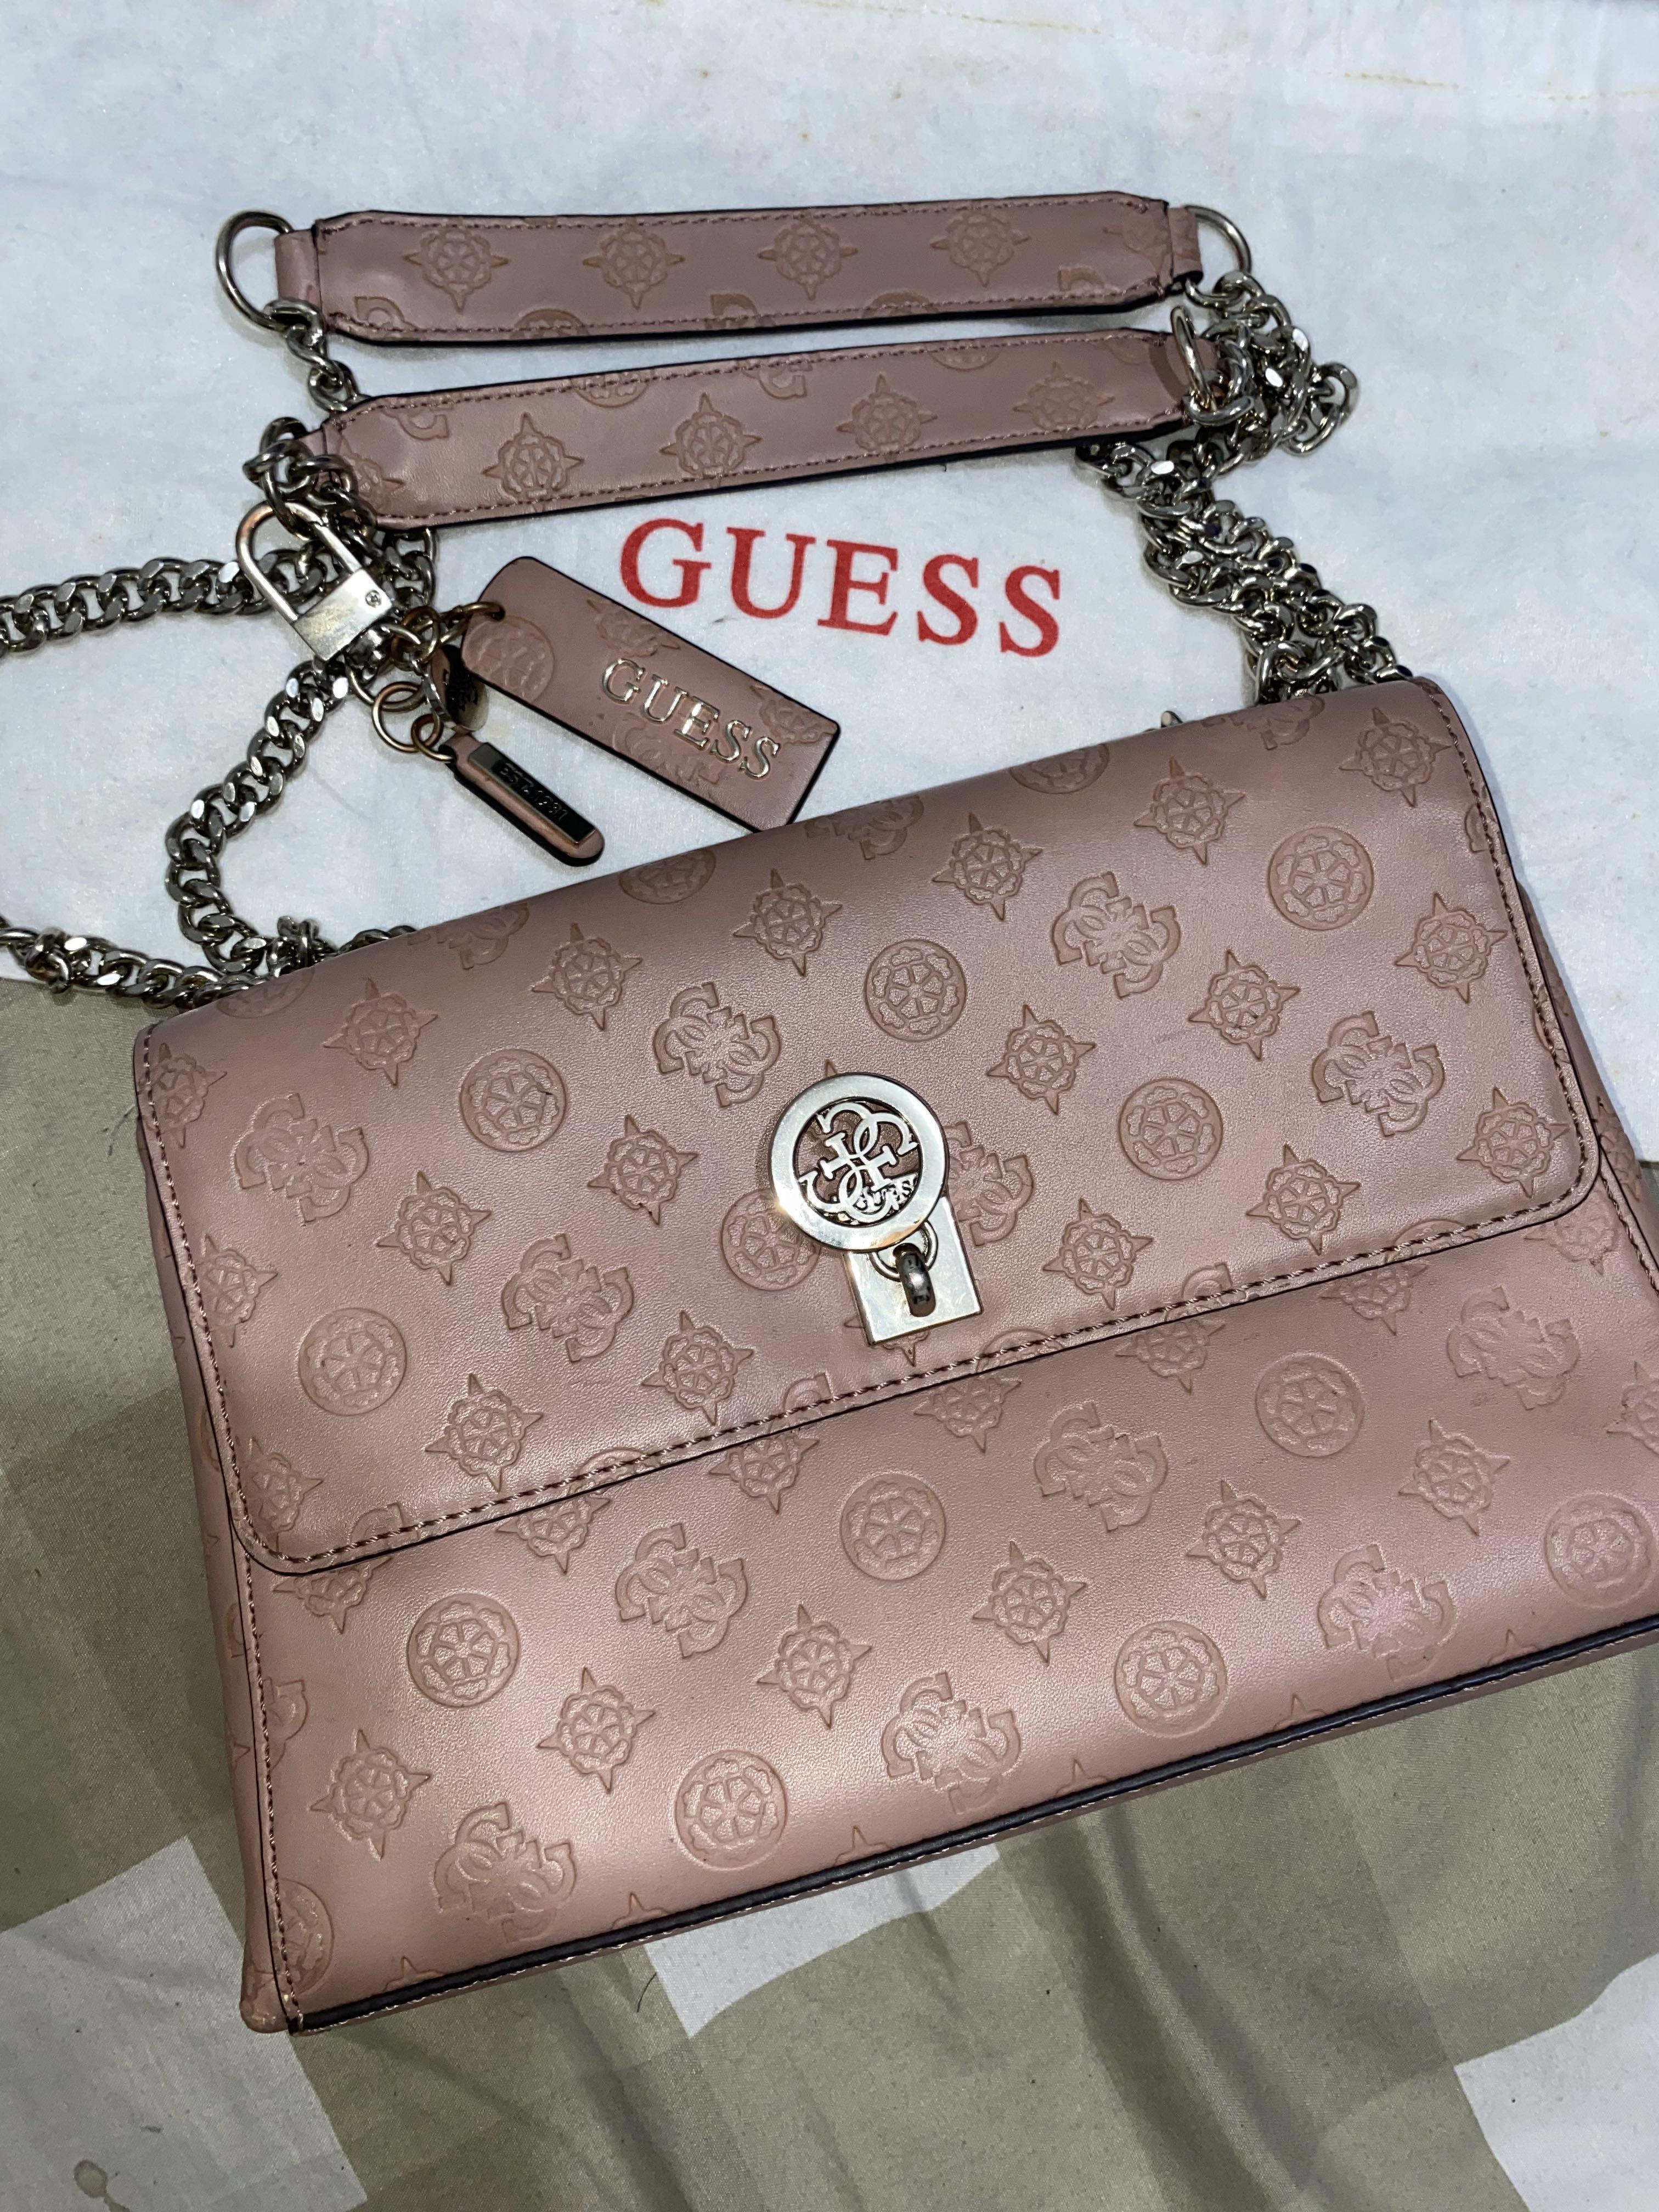 Vintage Original Guess Bag ✨from my 2000s archive... - Depop